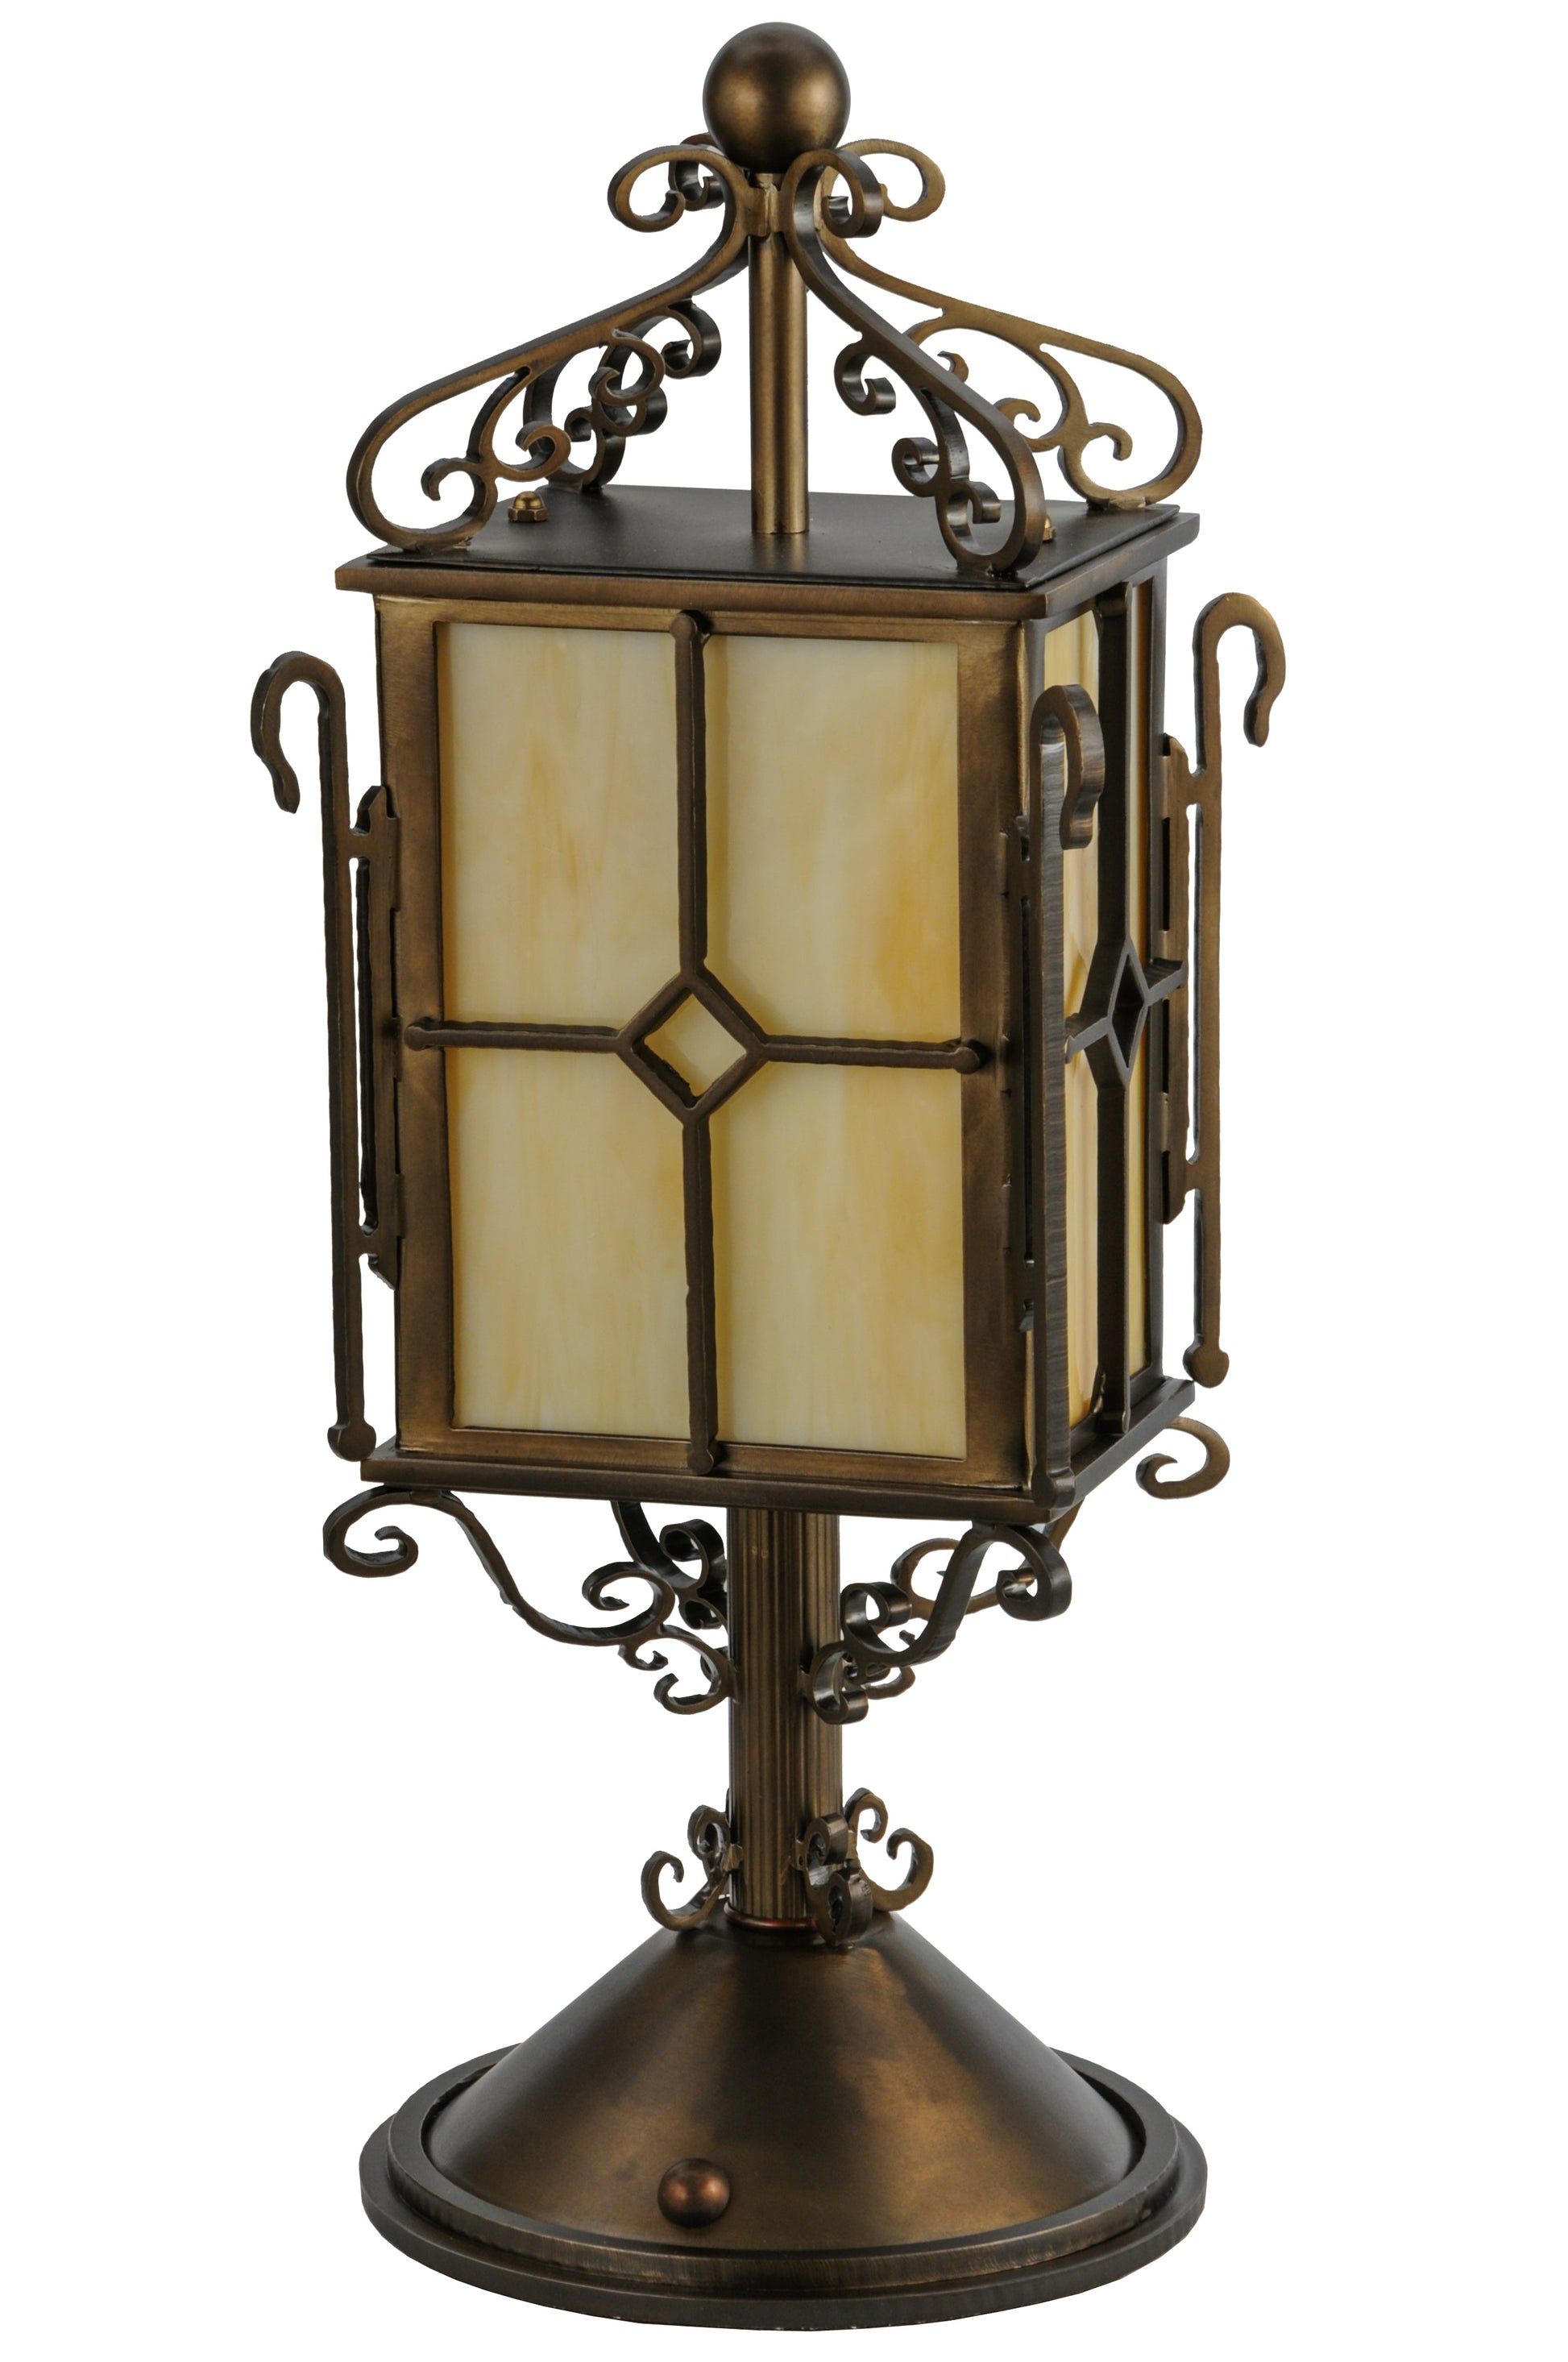 19" Standford Tabletop Lantern by 2nd Ave Lighting